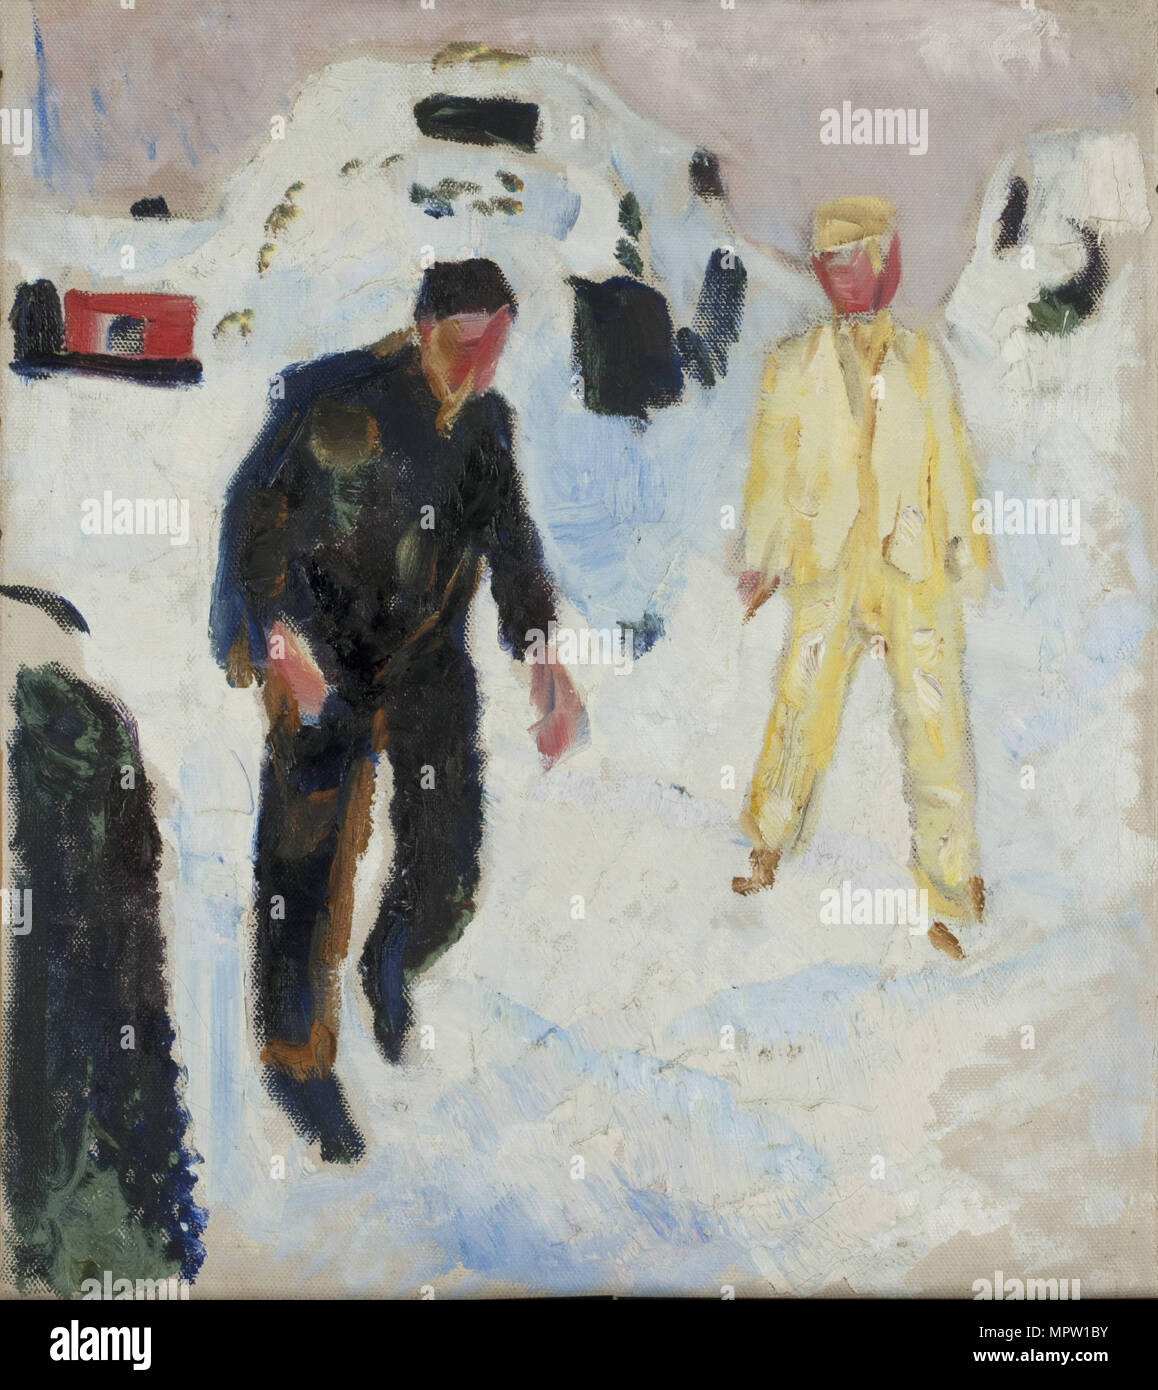 Black and Yellow Men in Snow, 1910-1912. Stock Photo